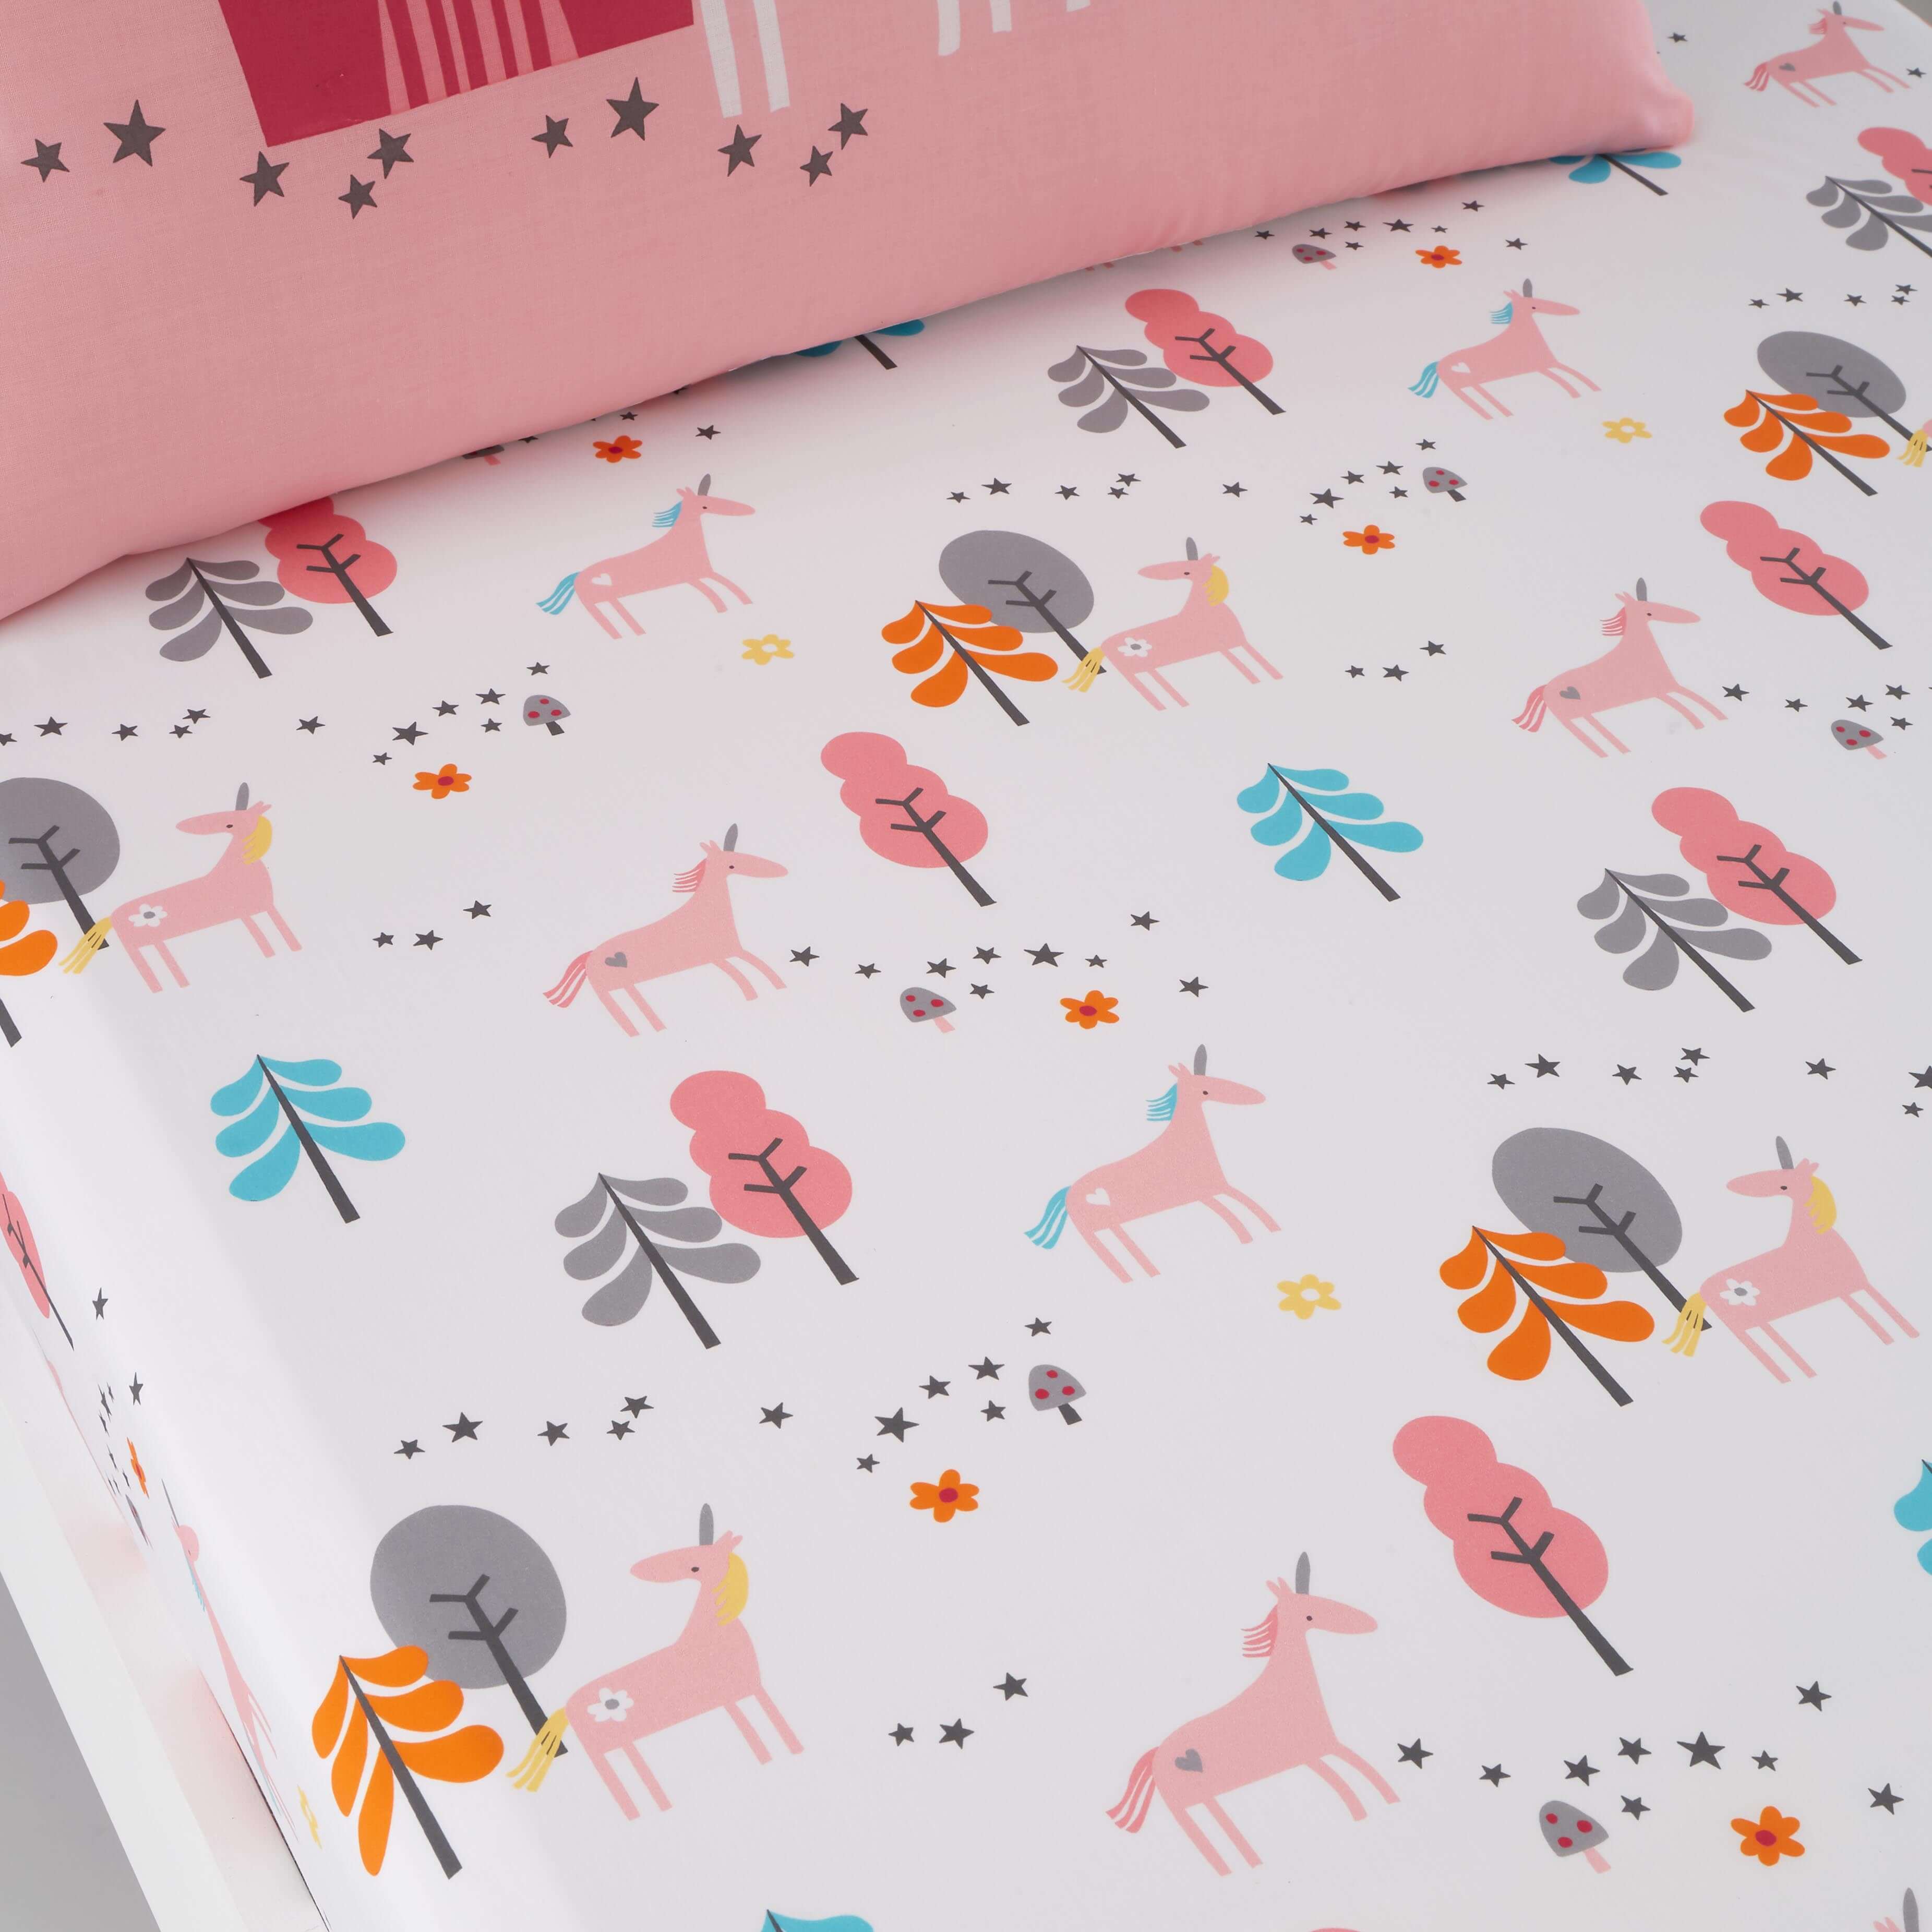 Fitted Bed Sheets Single Unicornland